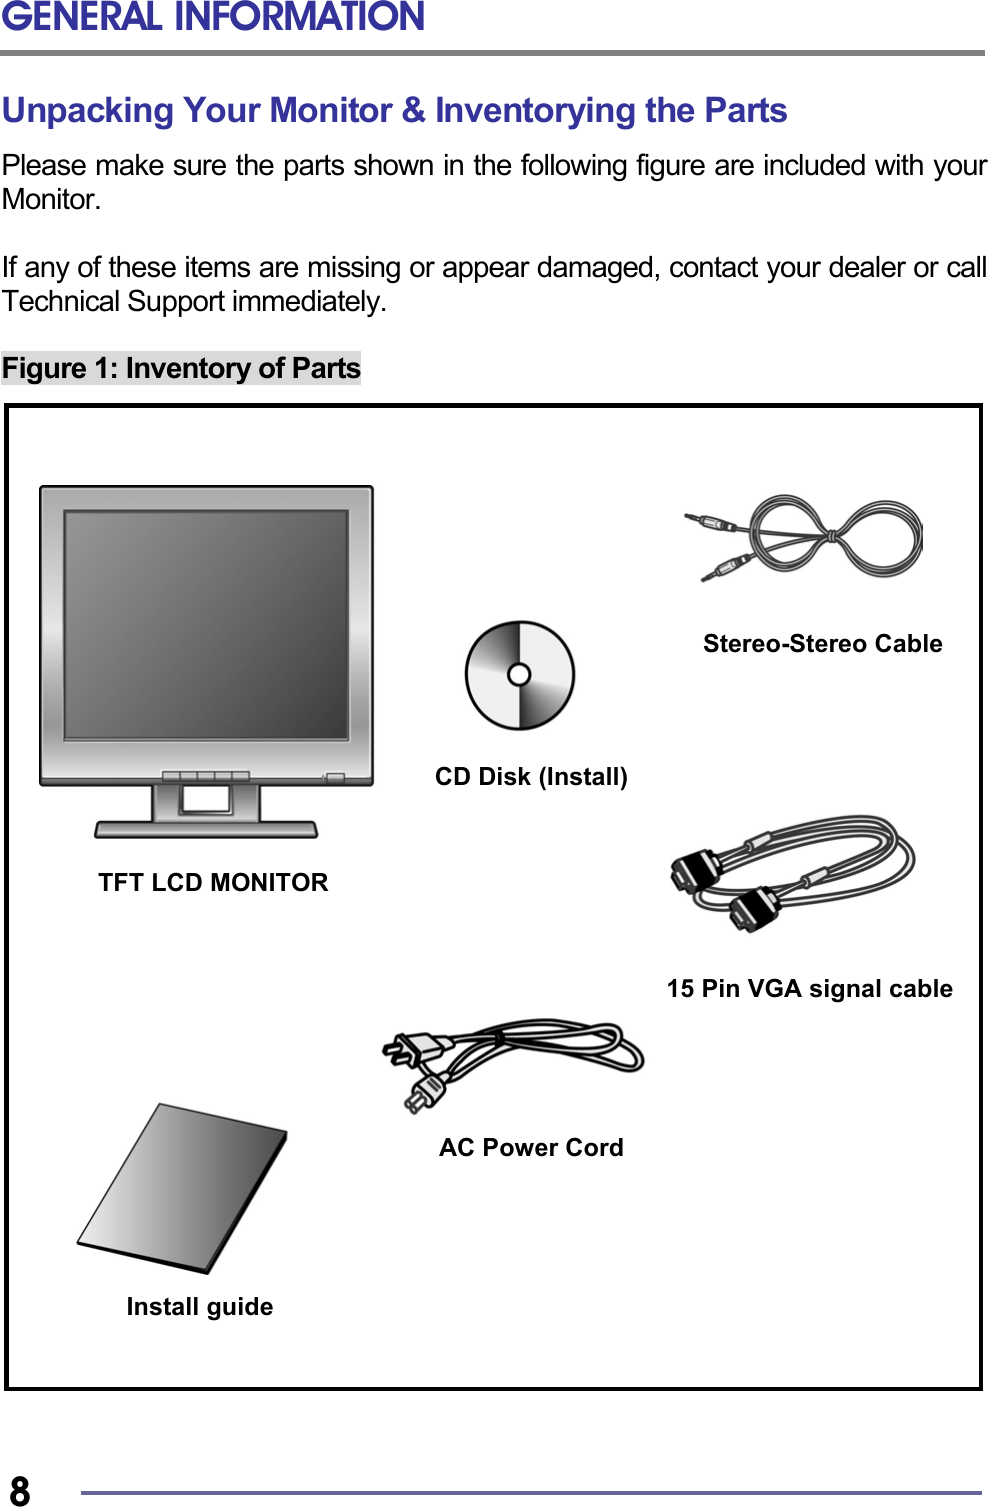 GENERAL INFORMATION   8 Unpacking Your Monitor &amp; Inventorying the Parts Please make sure the parts shown in the following figure are included with your Monitor.  If any of these items are missing or appear damaged, contact your dealer or call Technical Support immediately.  Figure 1: Inventory of Parts                                 TFT LCD MONITOR Install guide AC Power Cord Stereo-Stereo CableCD Disk (Install) 15 Pin VGA signal cable